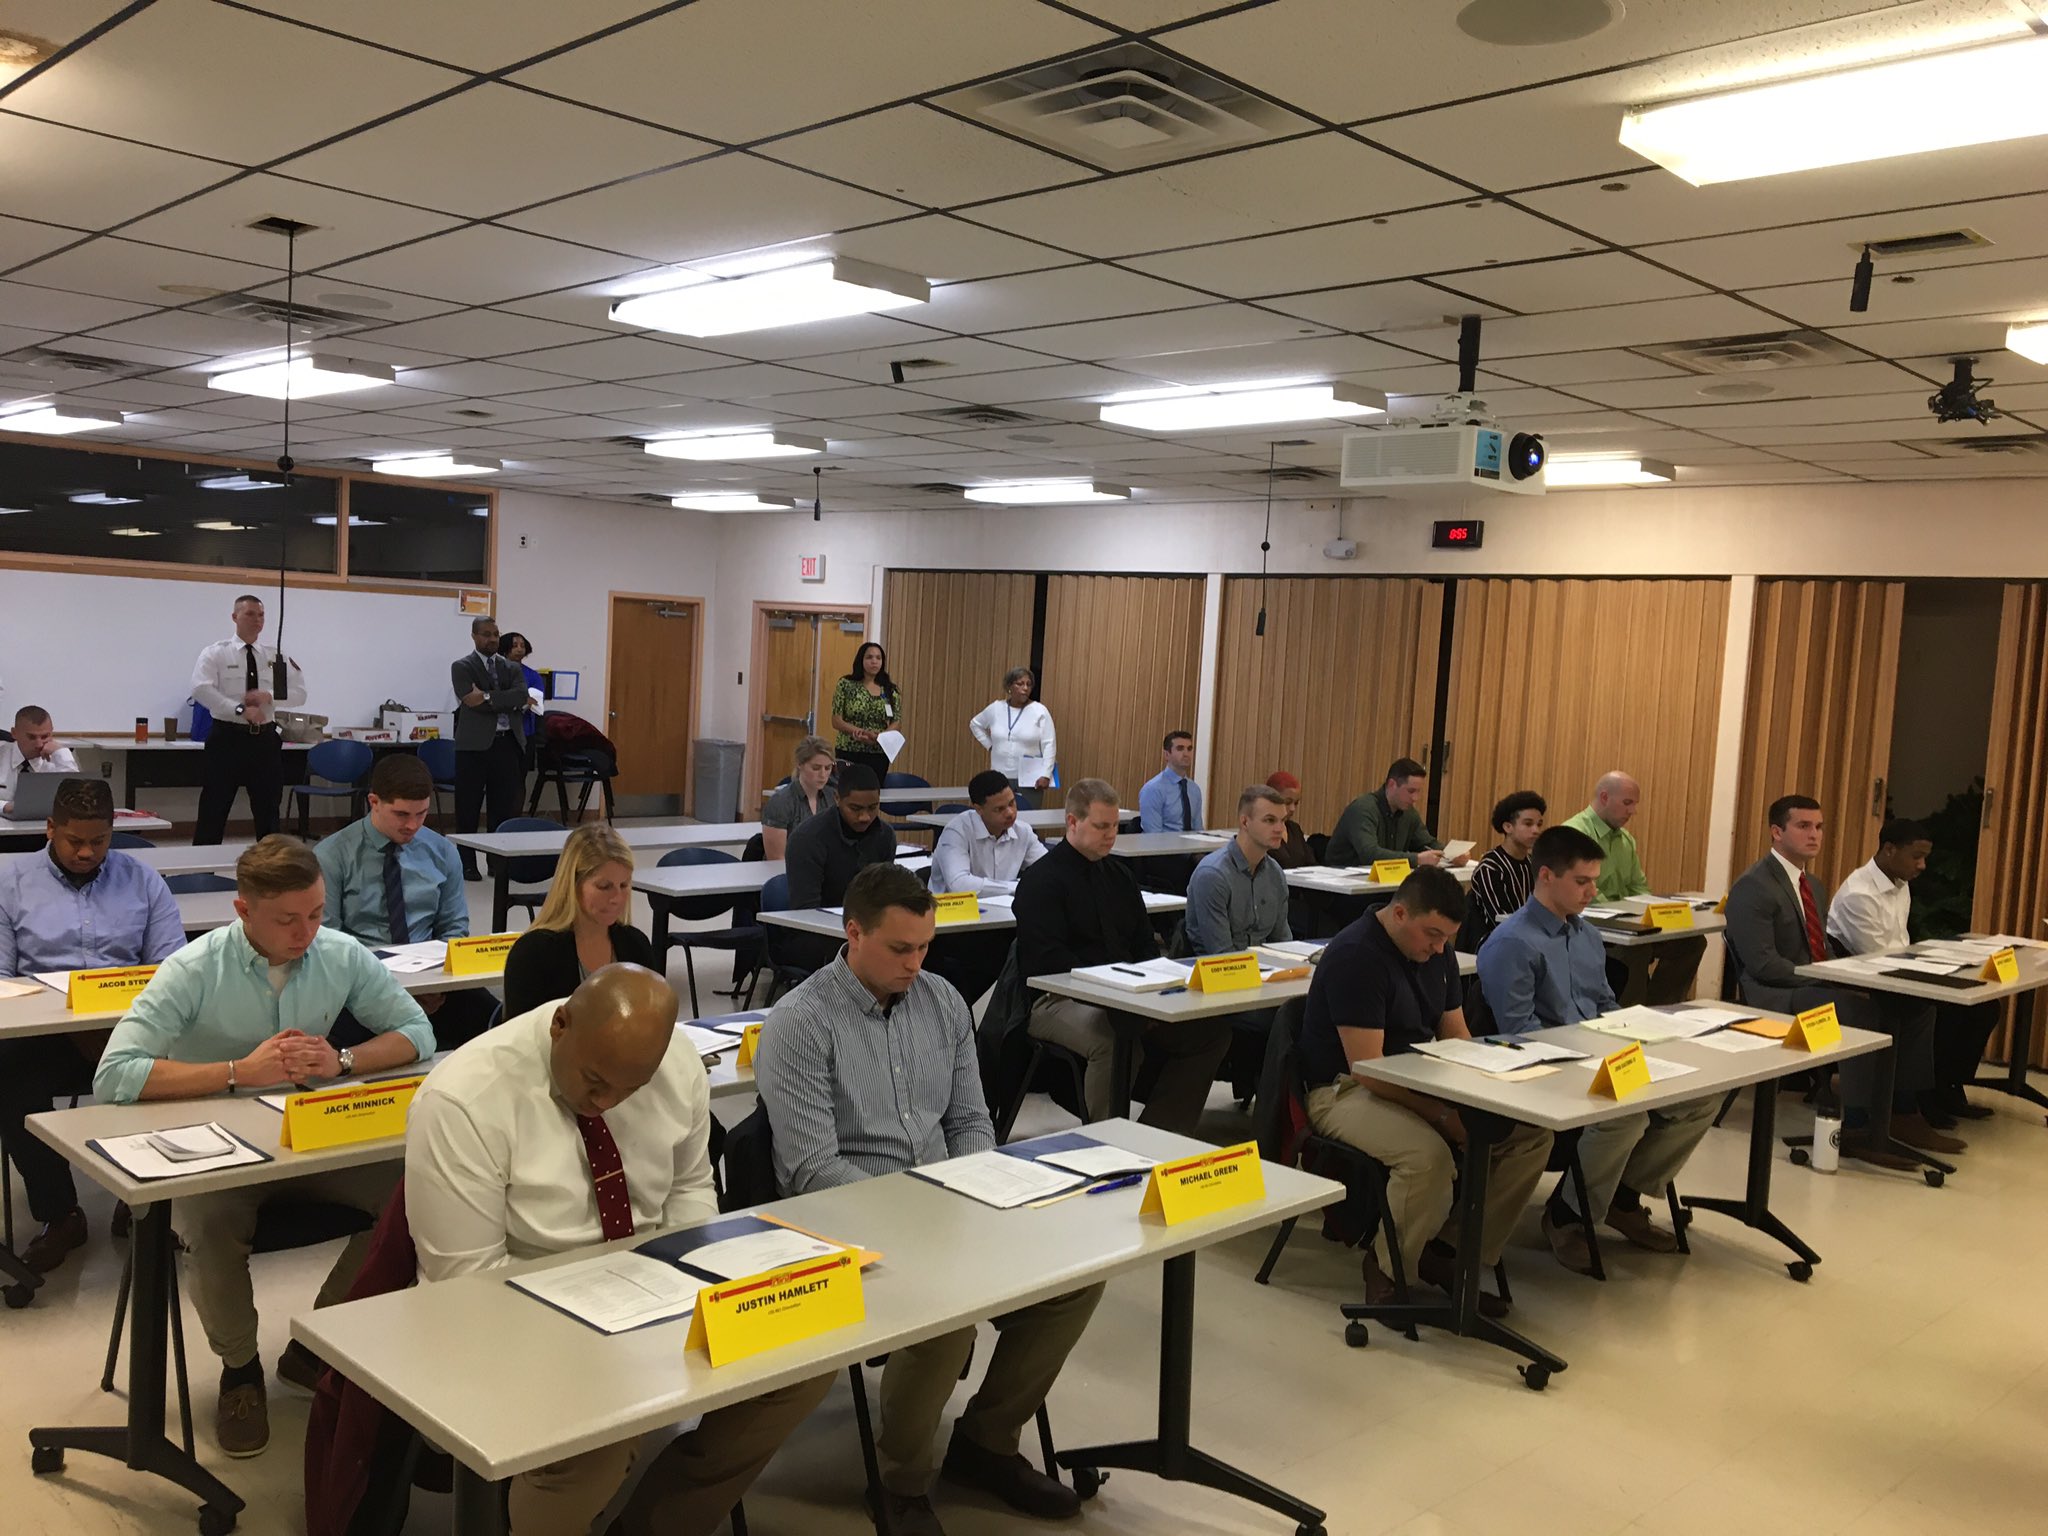 Prince georges county fireems department on members of pgfd career recruit school class begin their journey to being career fire amp ems personnel this morning good luck amp be safe